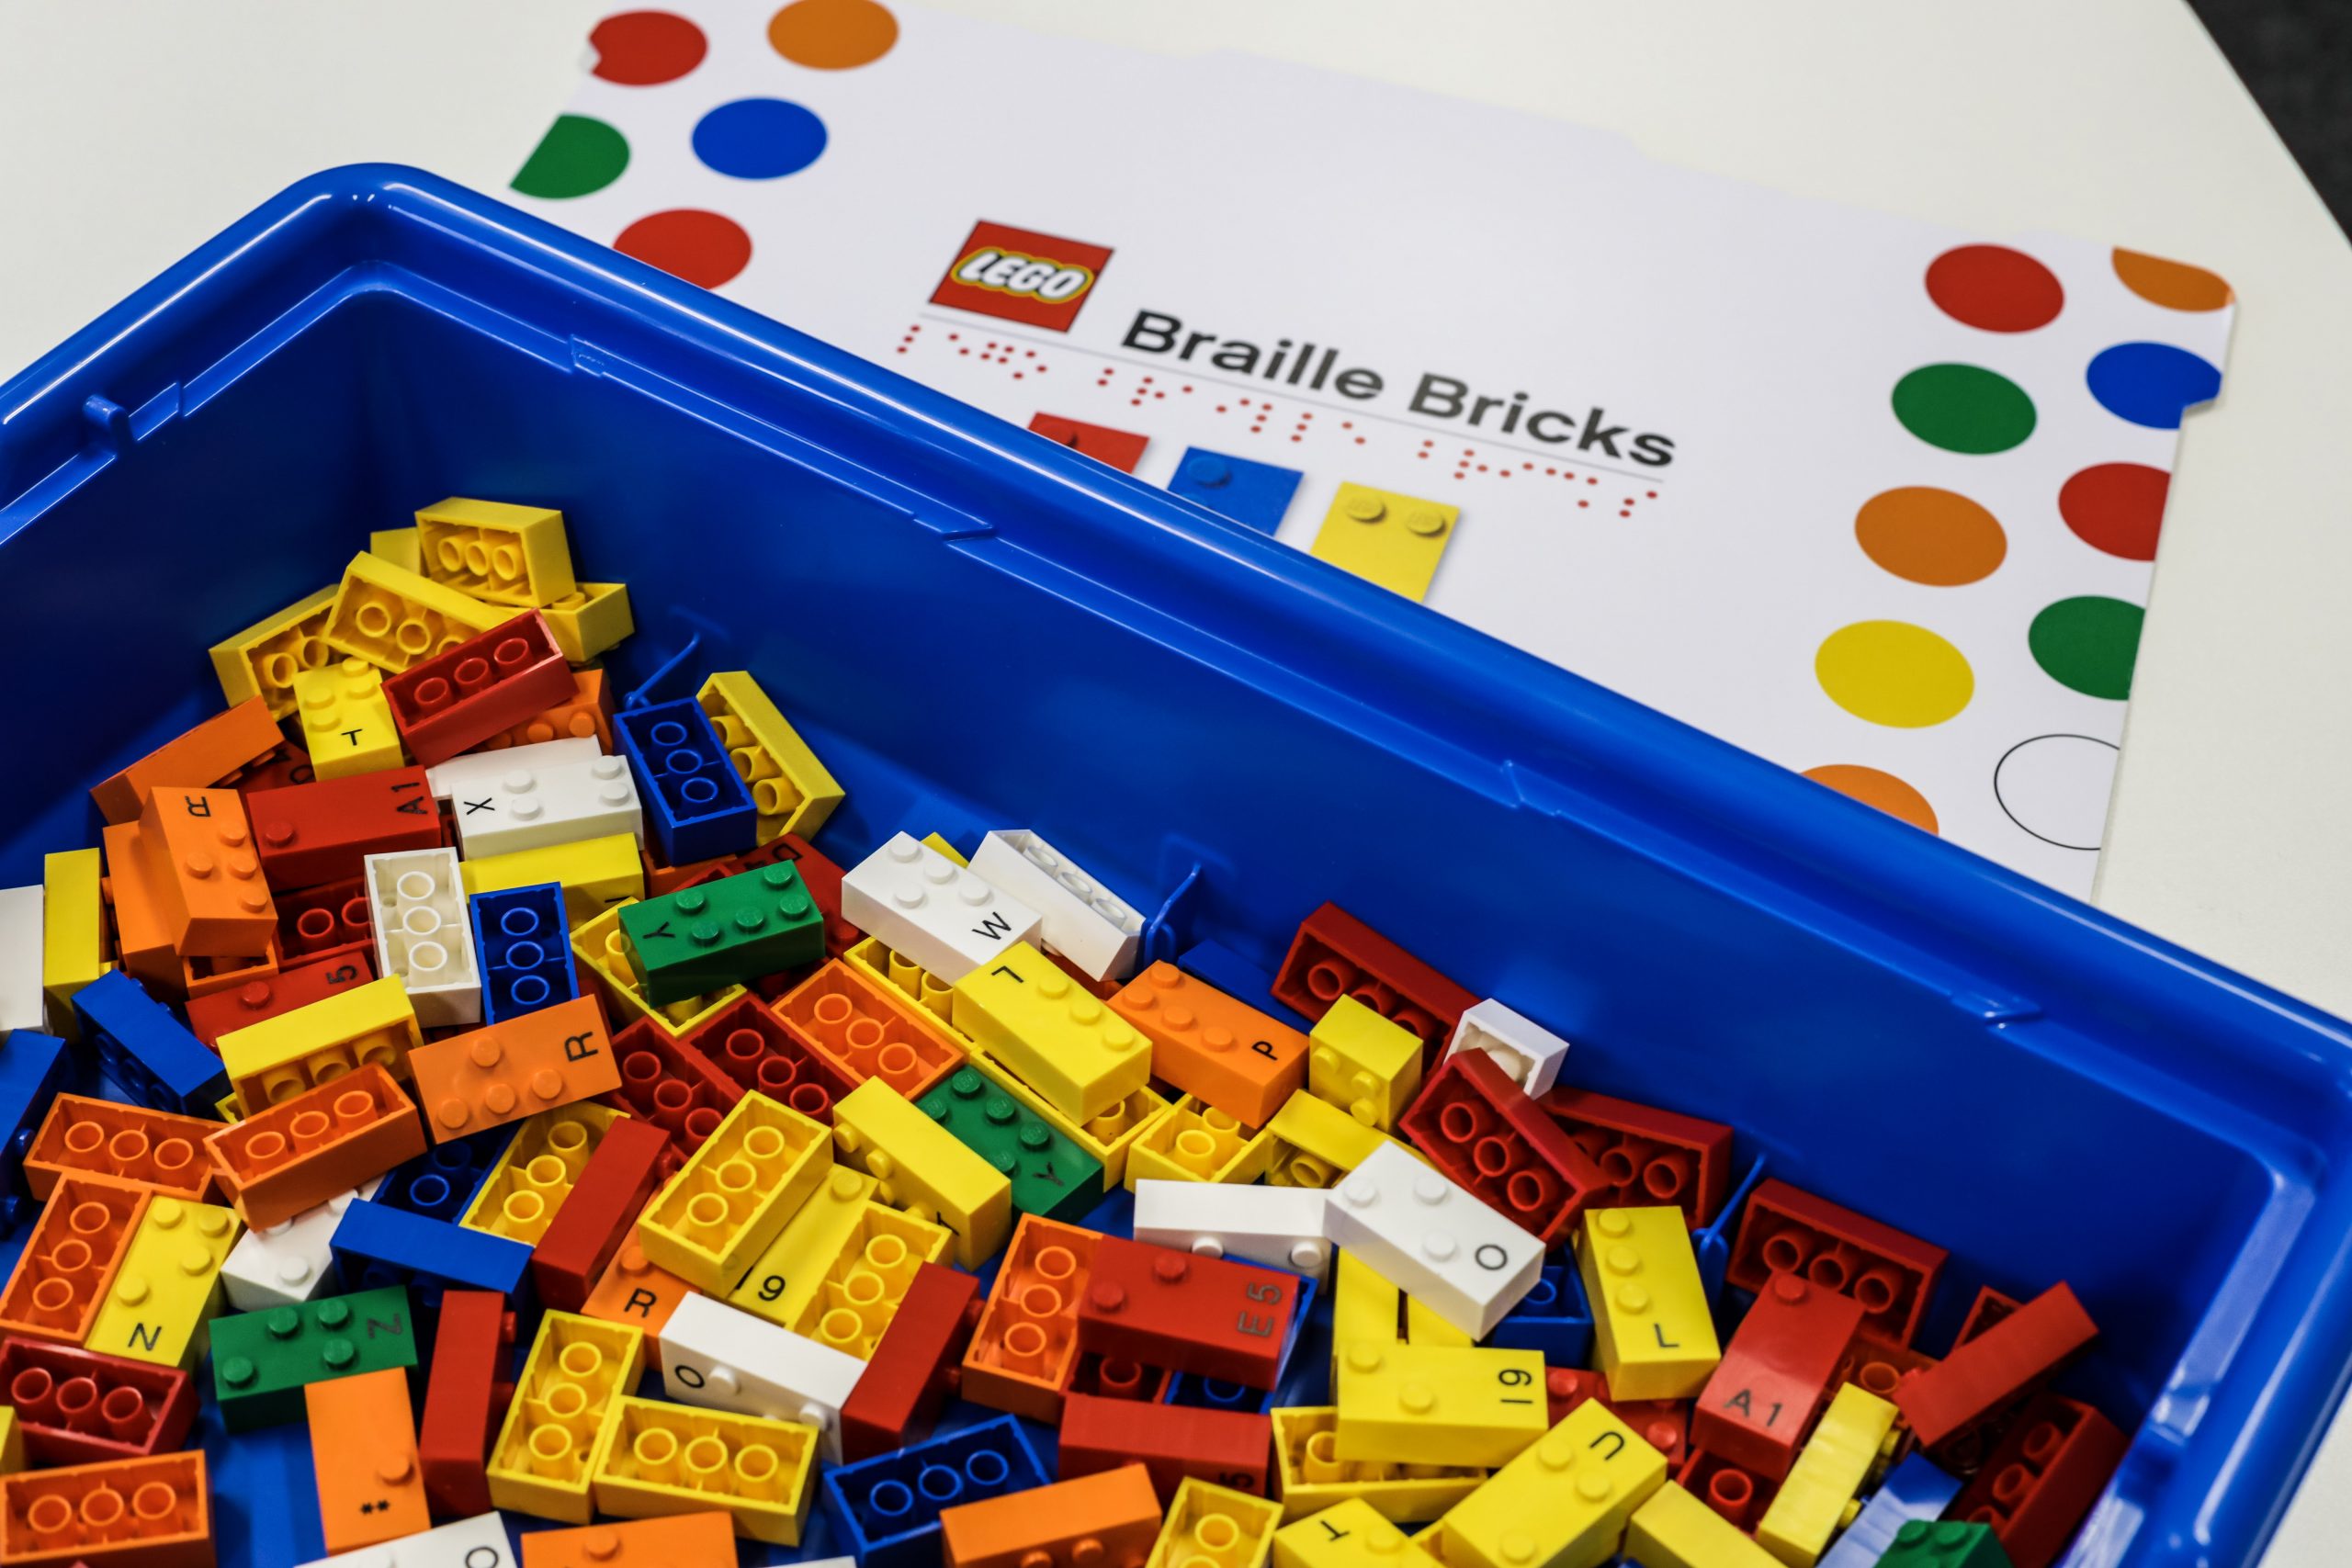 NEWS | New College Worcester announces collaboration with Lego to launch Braille Bricks